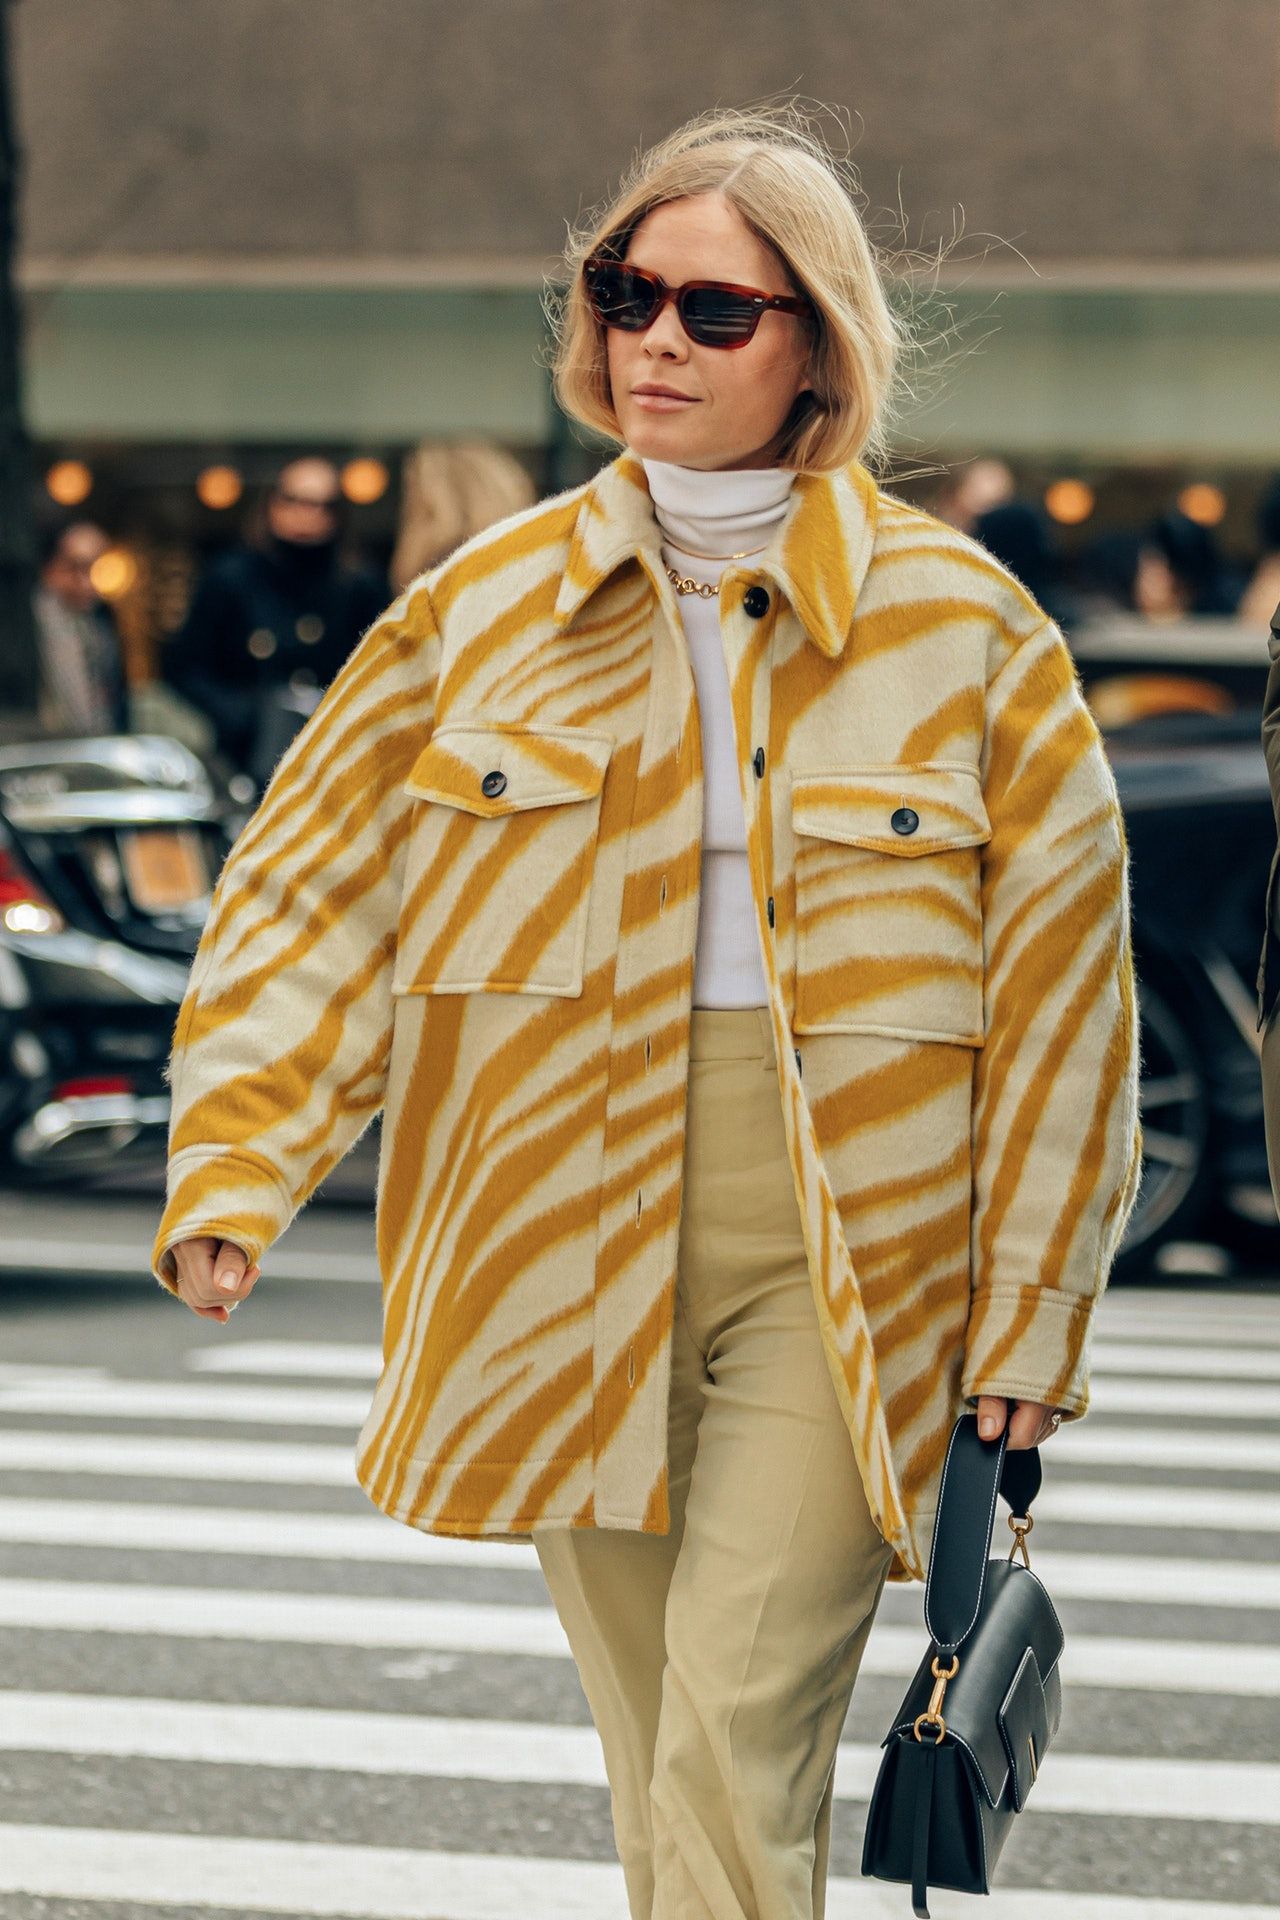 The Best Street Style From NYFW - The Best Street Style From NYFW -   18 style Fashion new york ideas